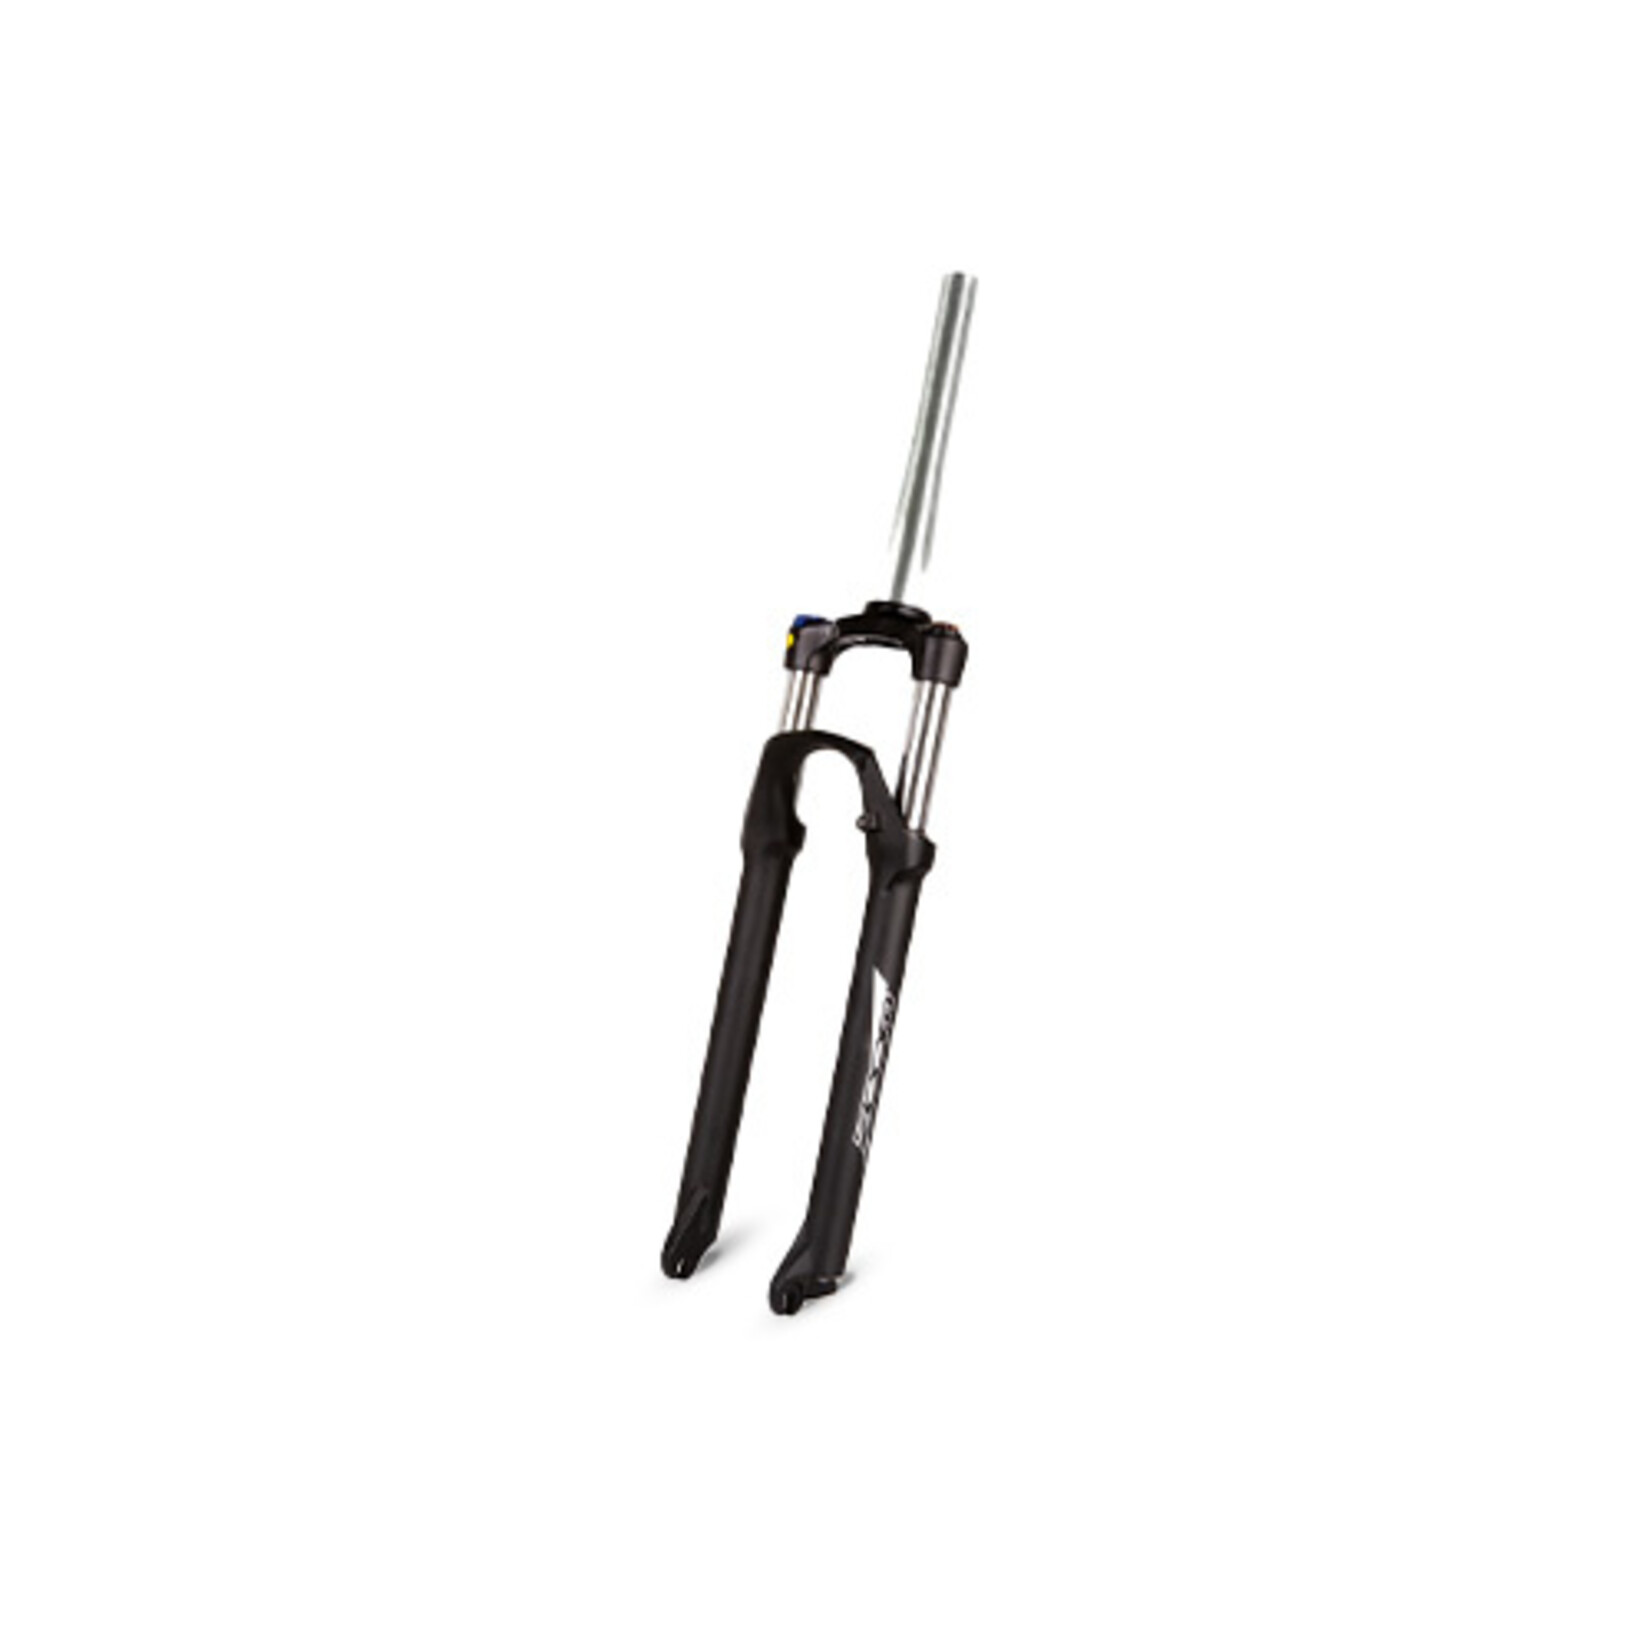 ZOOM ZOOM SUSPENSION FORK 29 1 1/8 A HEAD DISC ONLY